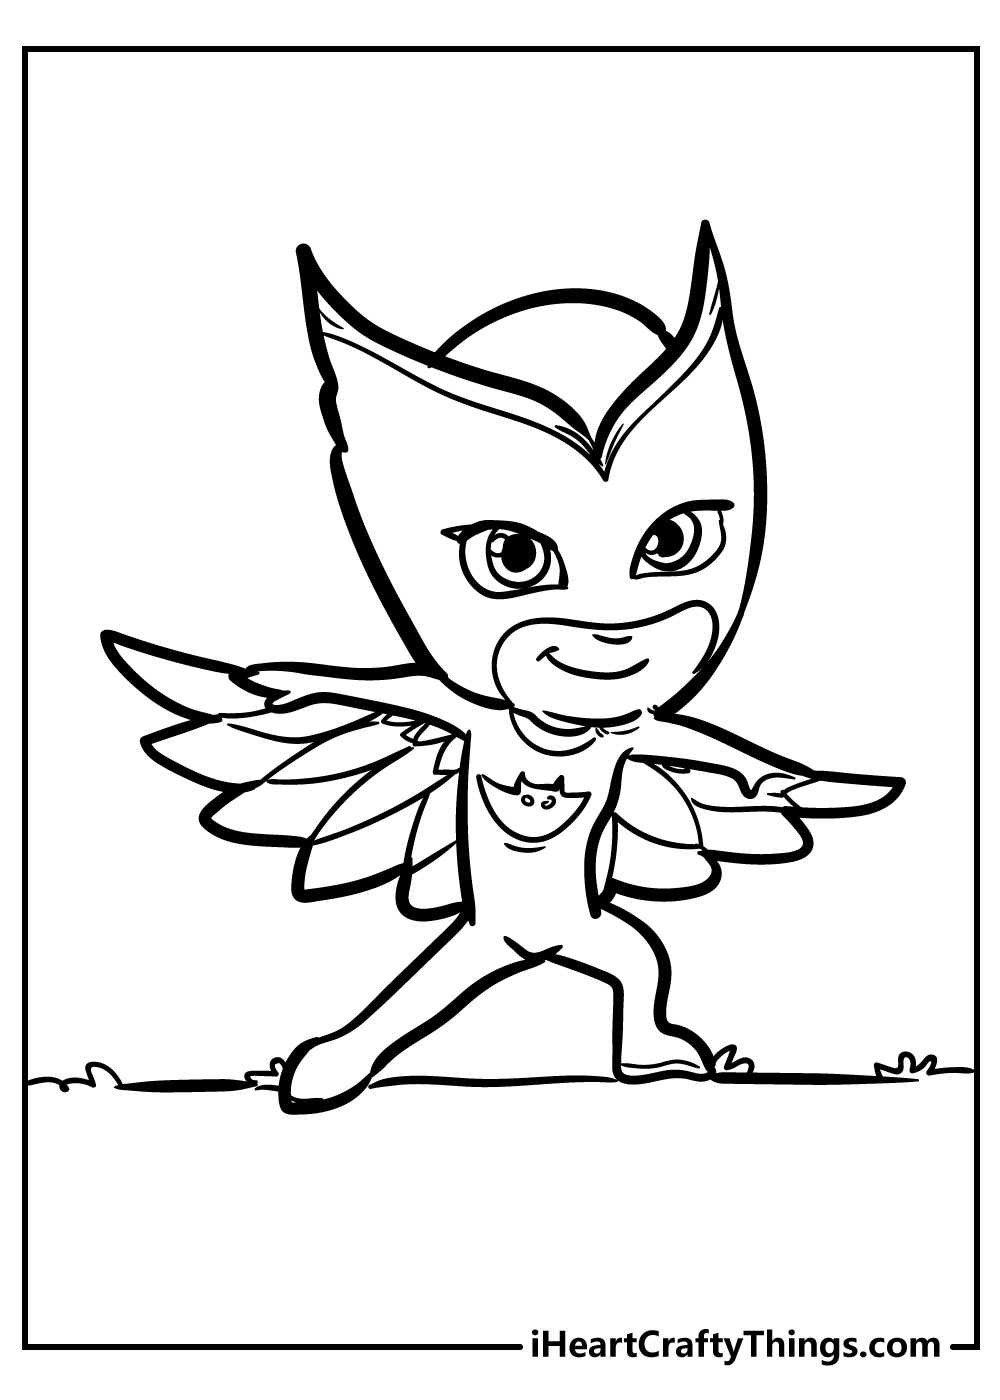 owlette pj masks colouring pages free download for kids